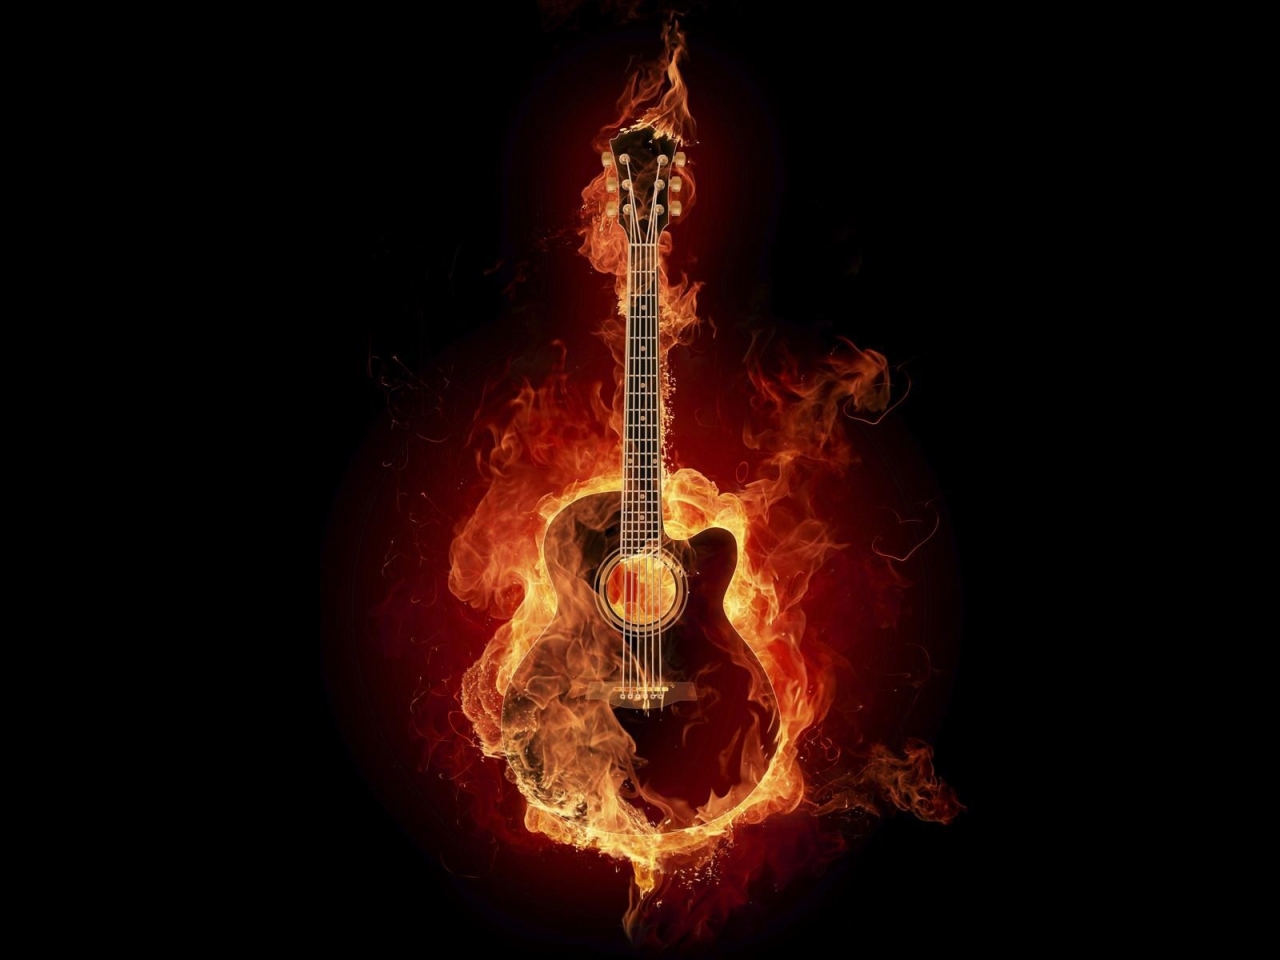 Great Fire Guitar for 1280 x 960 resolution